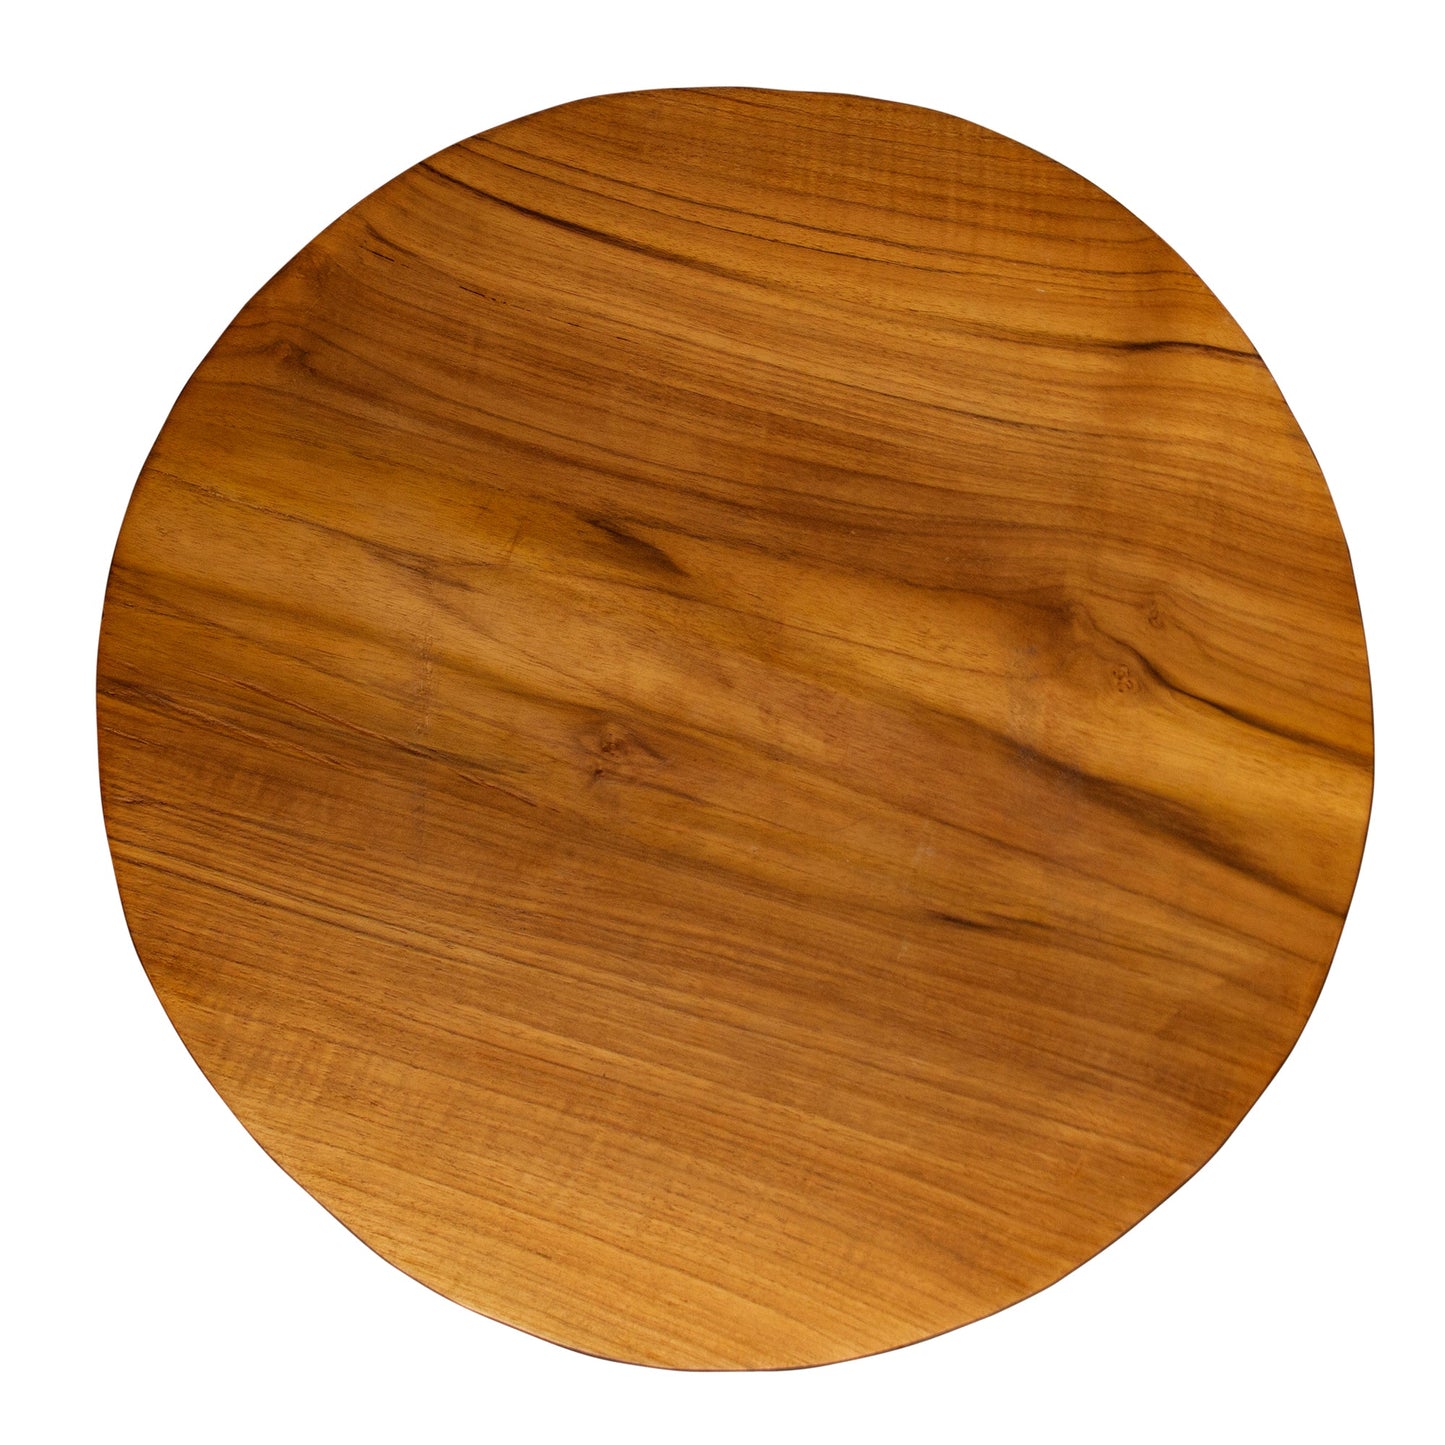 Indonesian Teak Wood Round Slab Accent Table by Andaluca Home